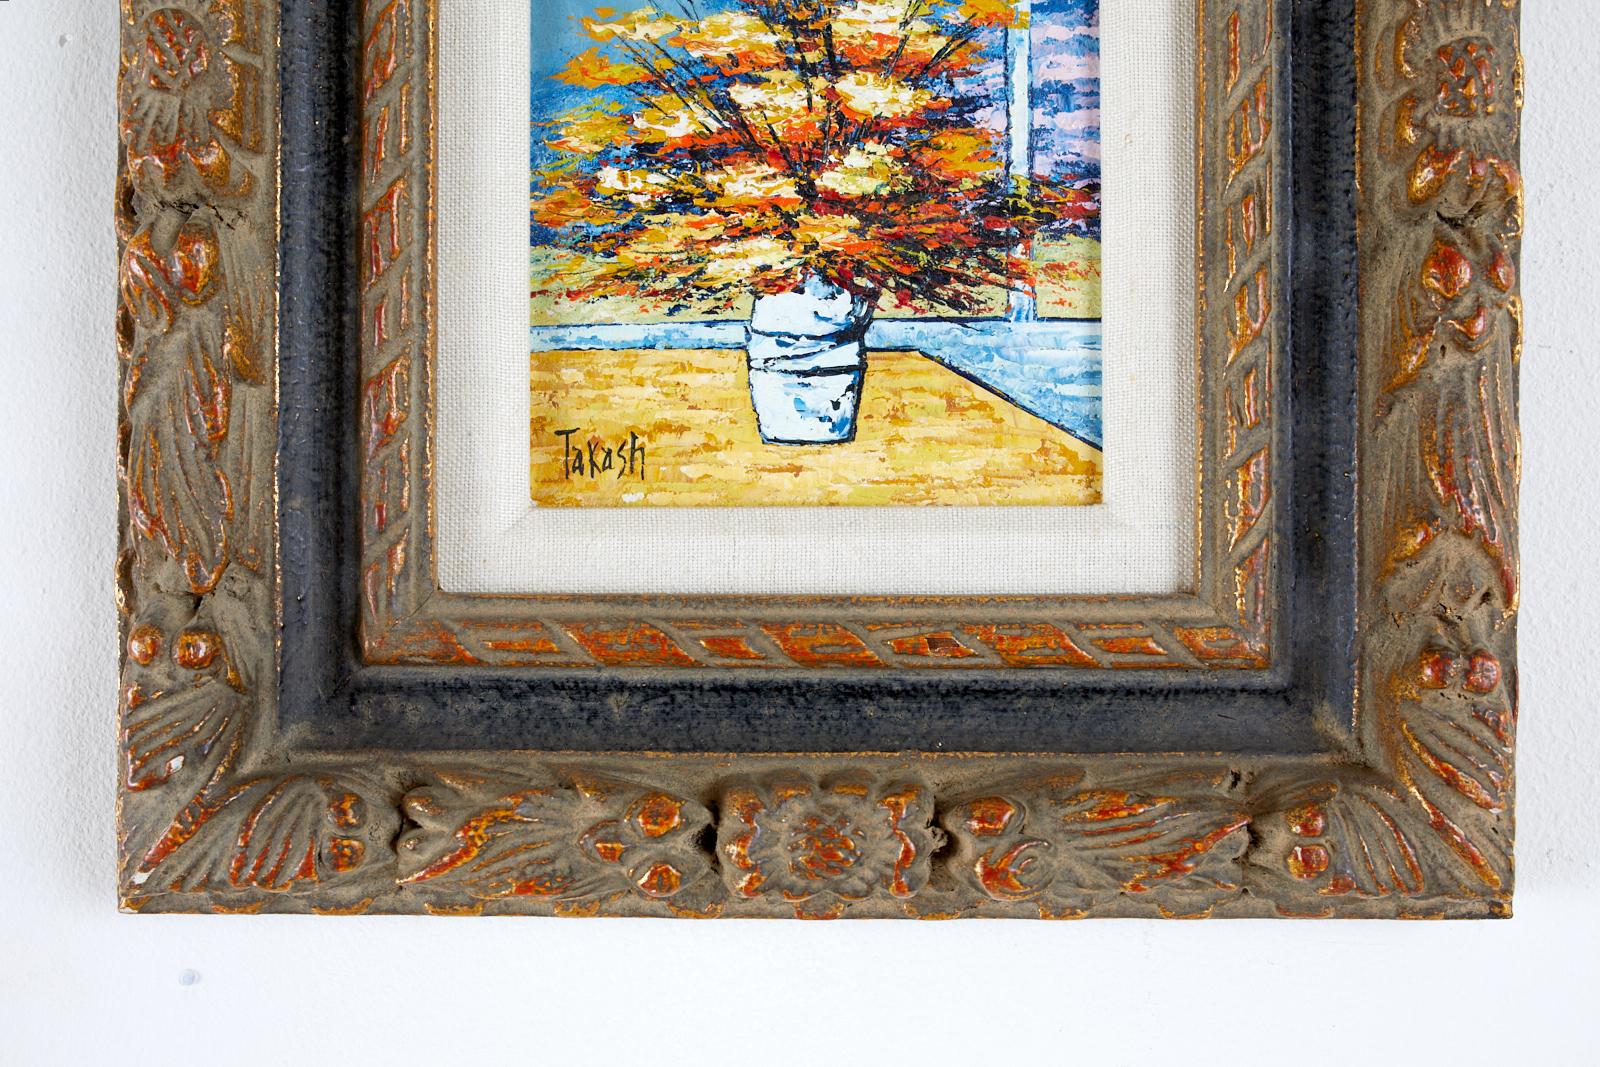 Petite and colorful mid-century impressionist style Japanese still life depicting a flower vase. Bursting with bright vivid colors and thick paint over a serene blue ground. Signed bottom left Takash and set in a gilt wood frame with a small linen